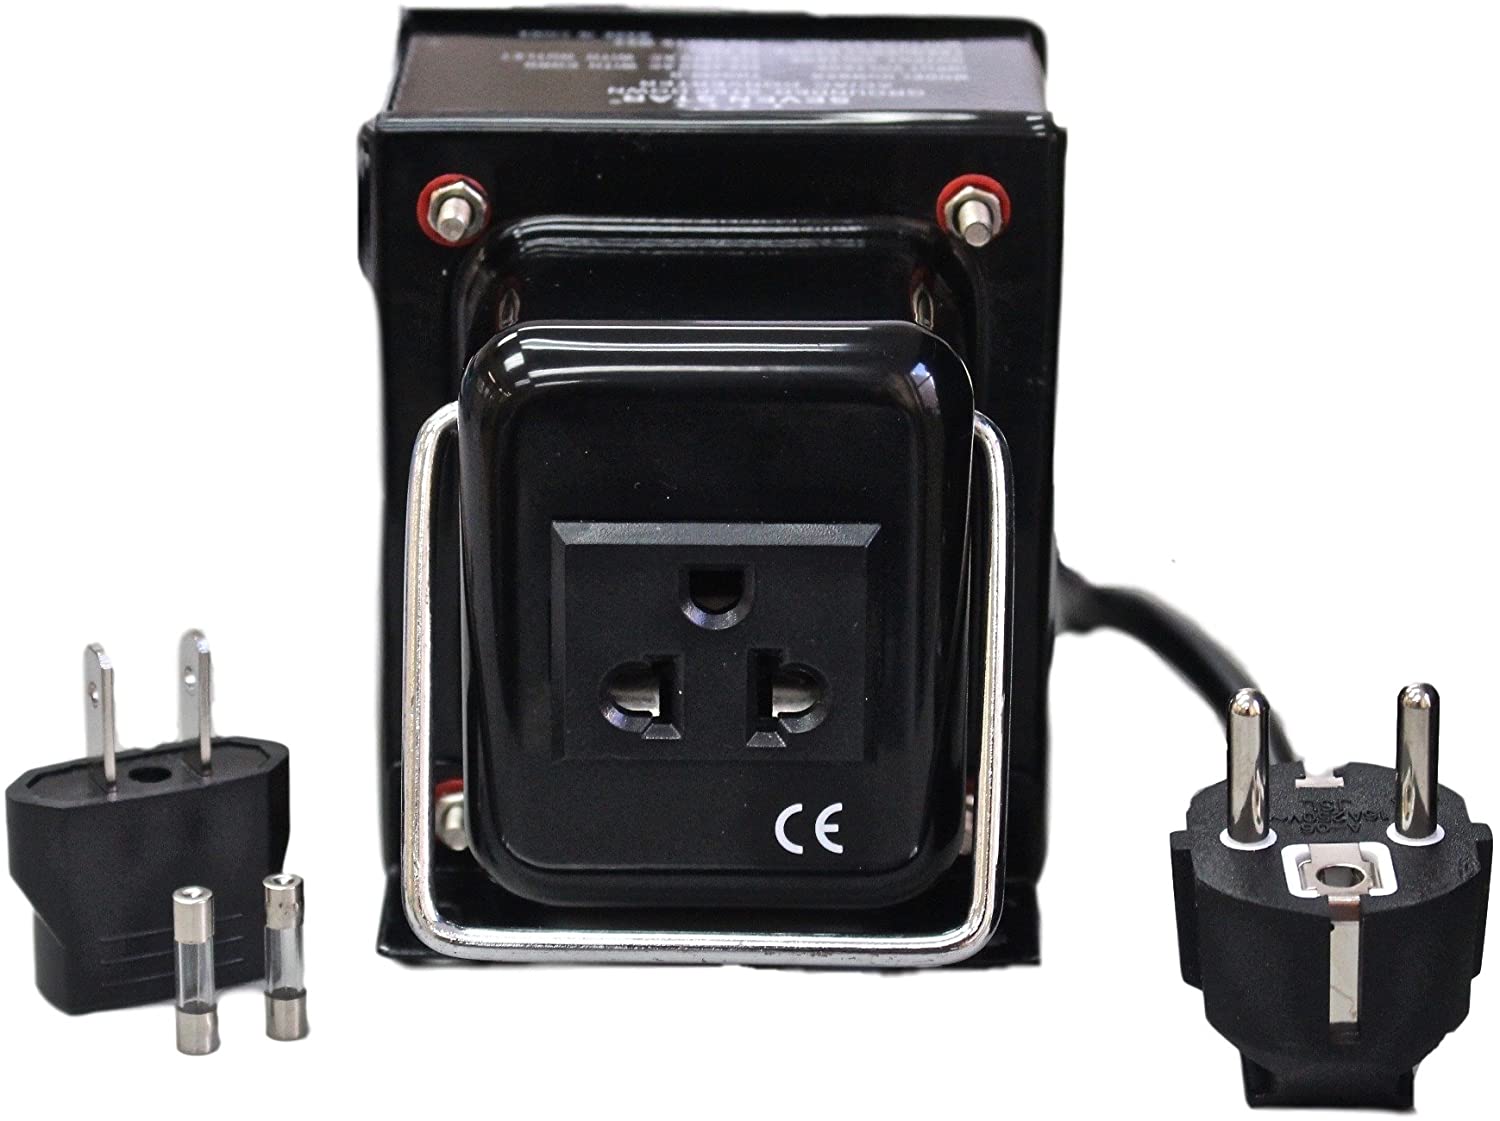 2000W Travel Adapter and Power Converter Mini Transformer Step Down 220V to 110V 